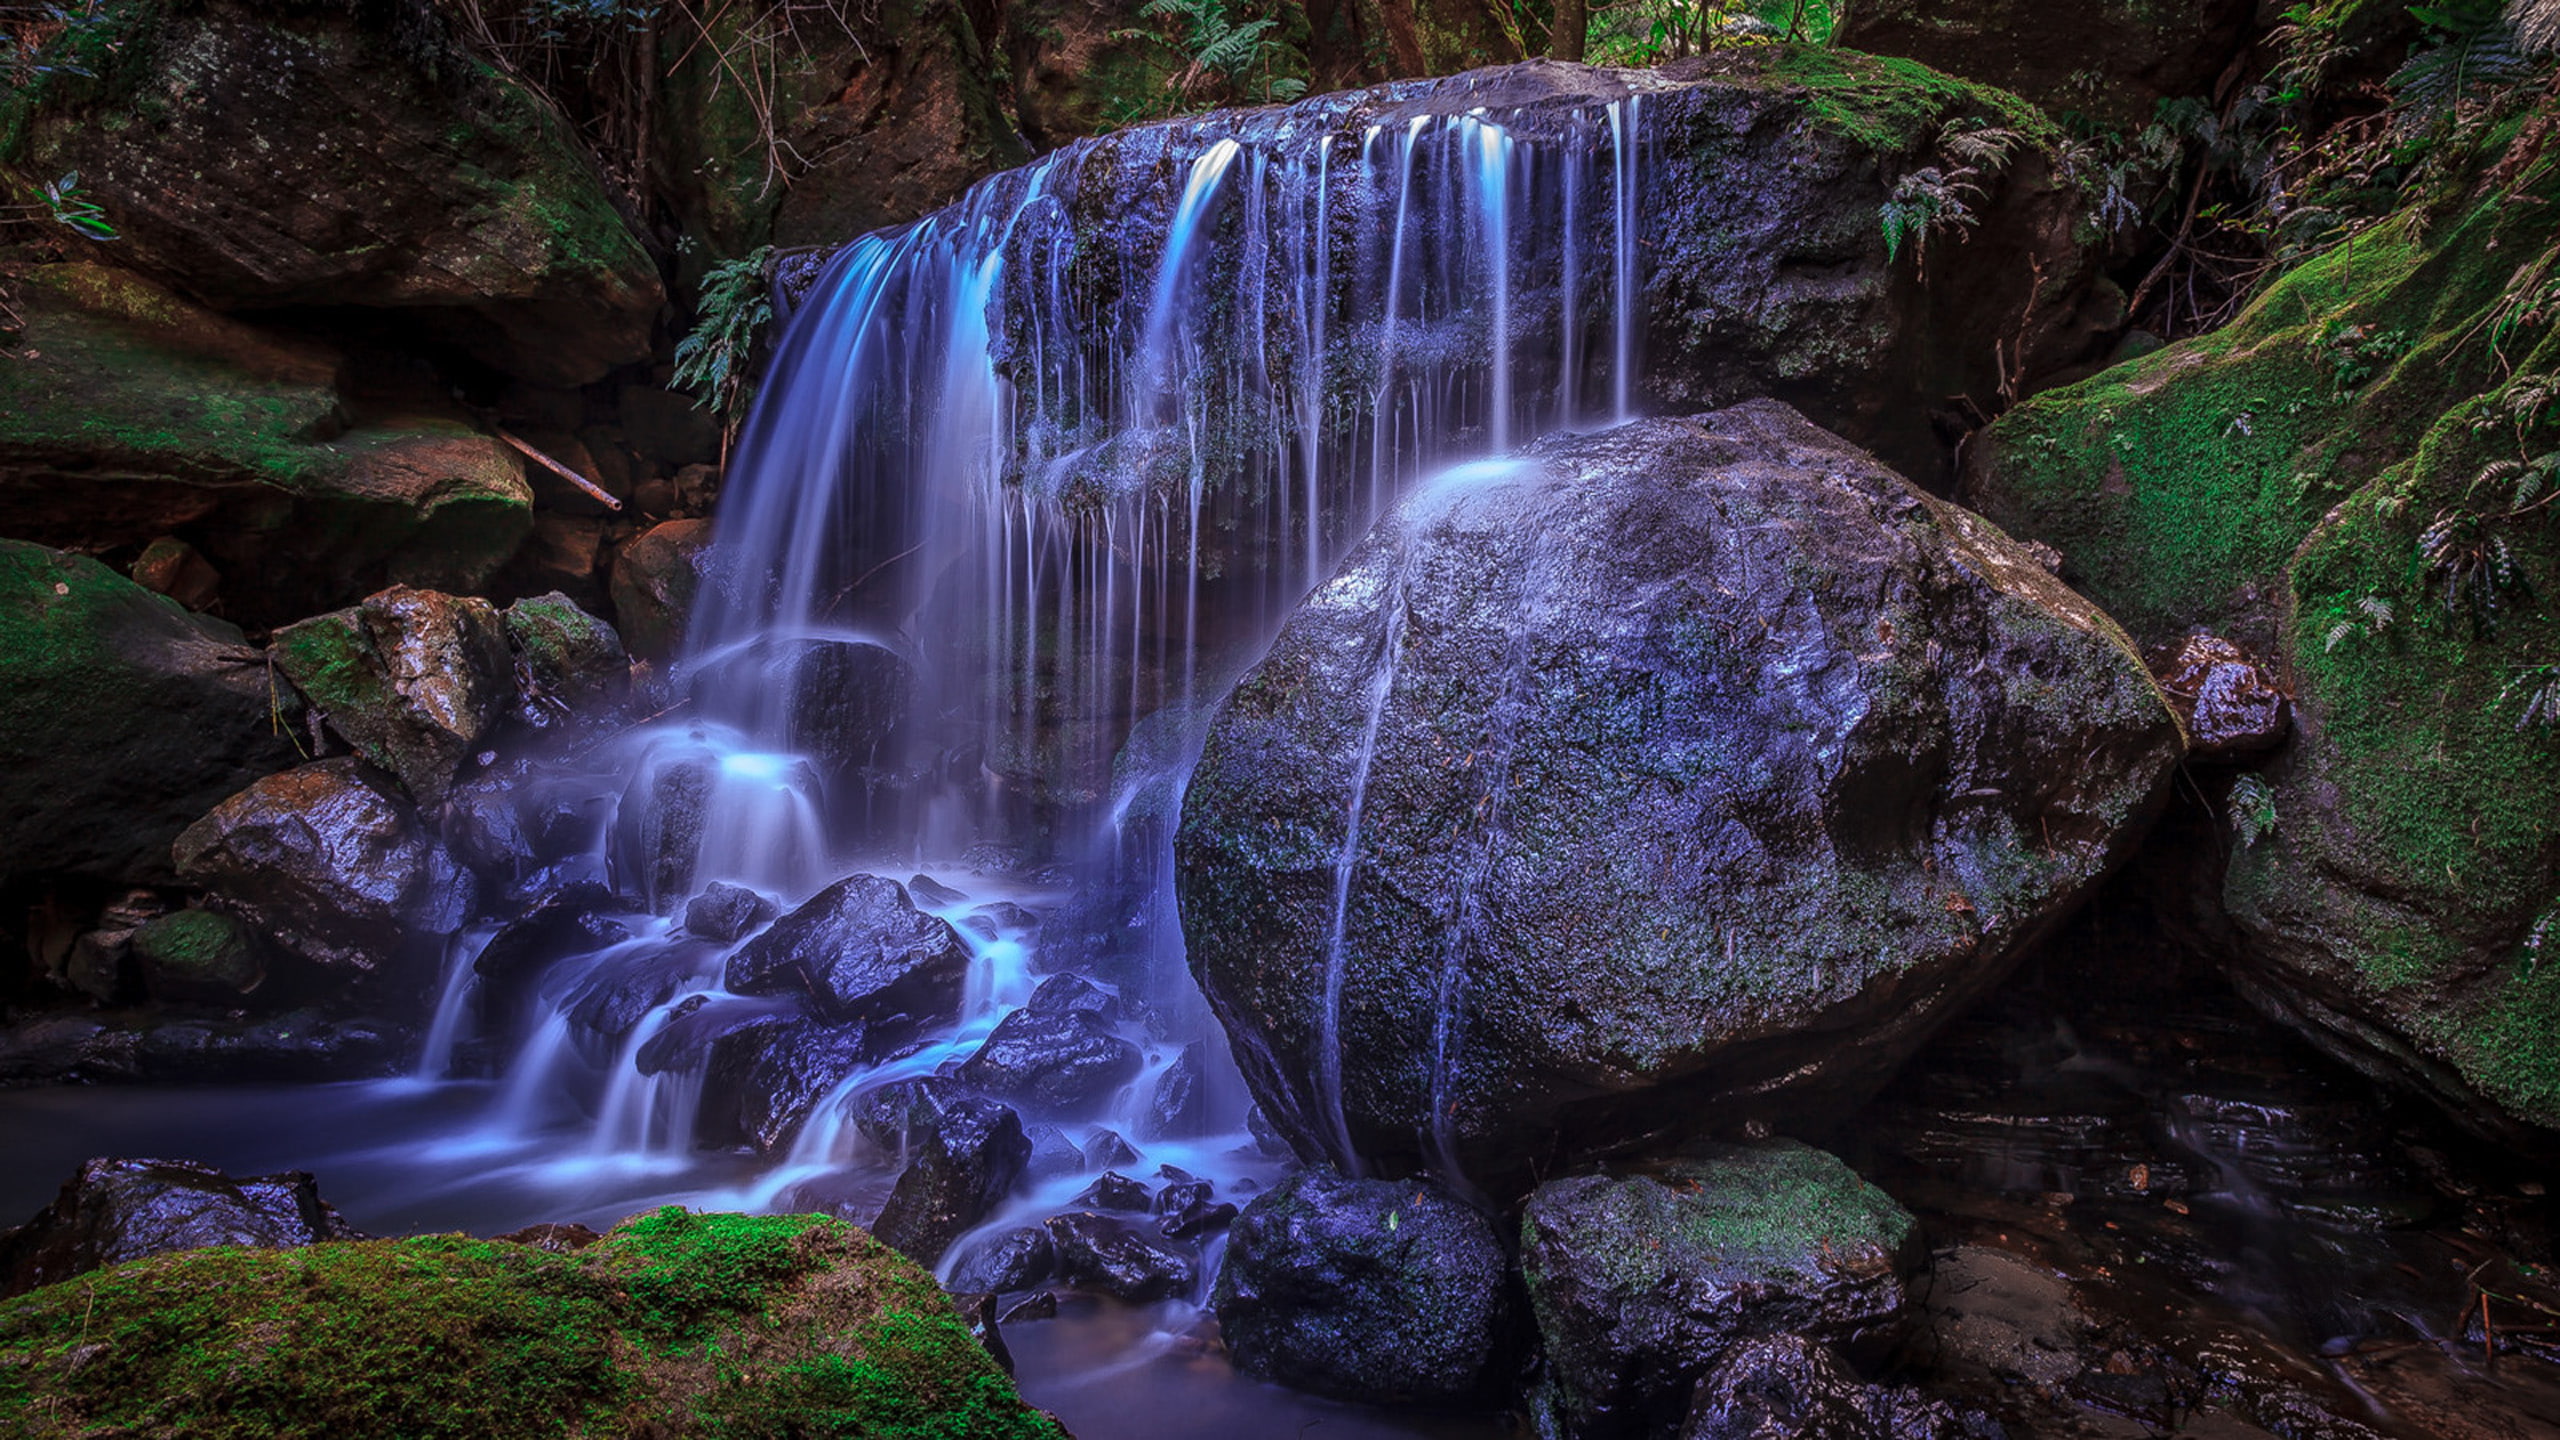 Small Waterfall On Mountain Stream The Blue Mountains Is The Region West Of Sydney In New South Wales In Australia Hd Wallpaper For Desktop 2560×1440